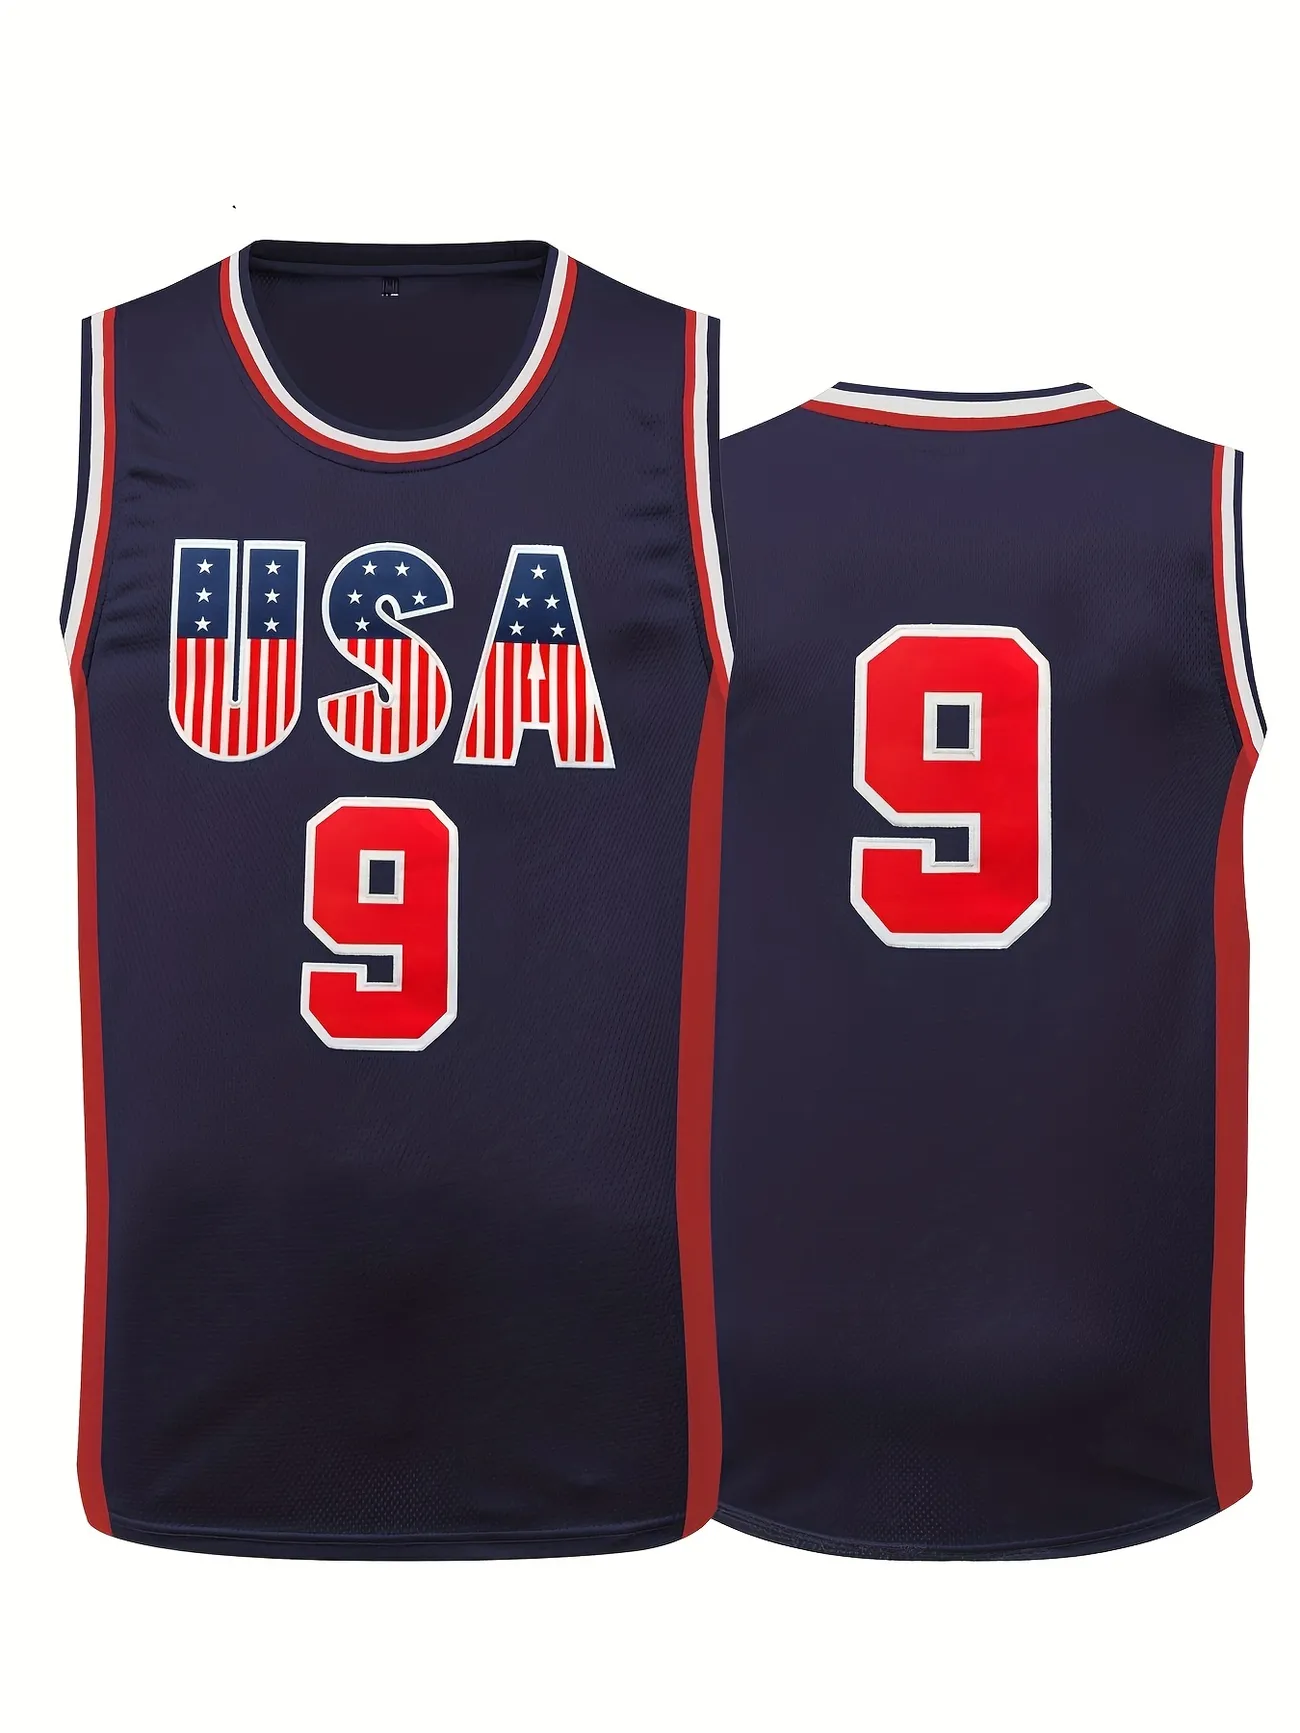 Men's USA #9 Basketball Jersey, Retro Embroidery Breathable Sports Uniform,  Sleeveless Basketball Shirt For Training Competition PARTY Costume Gift